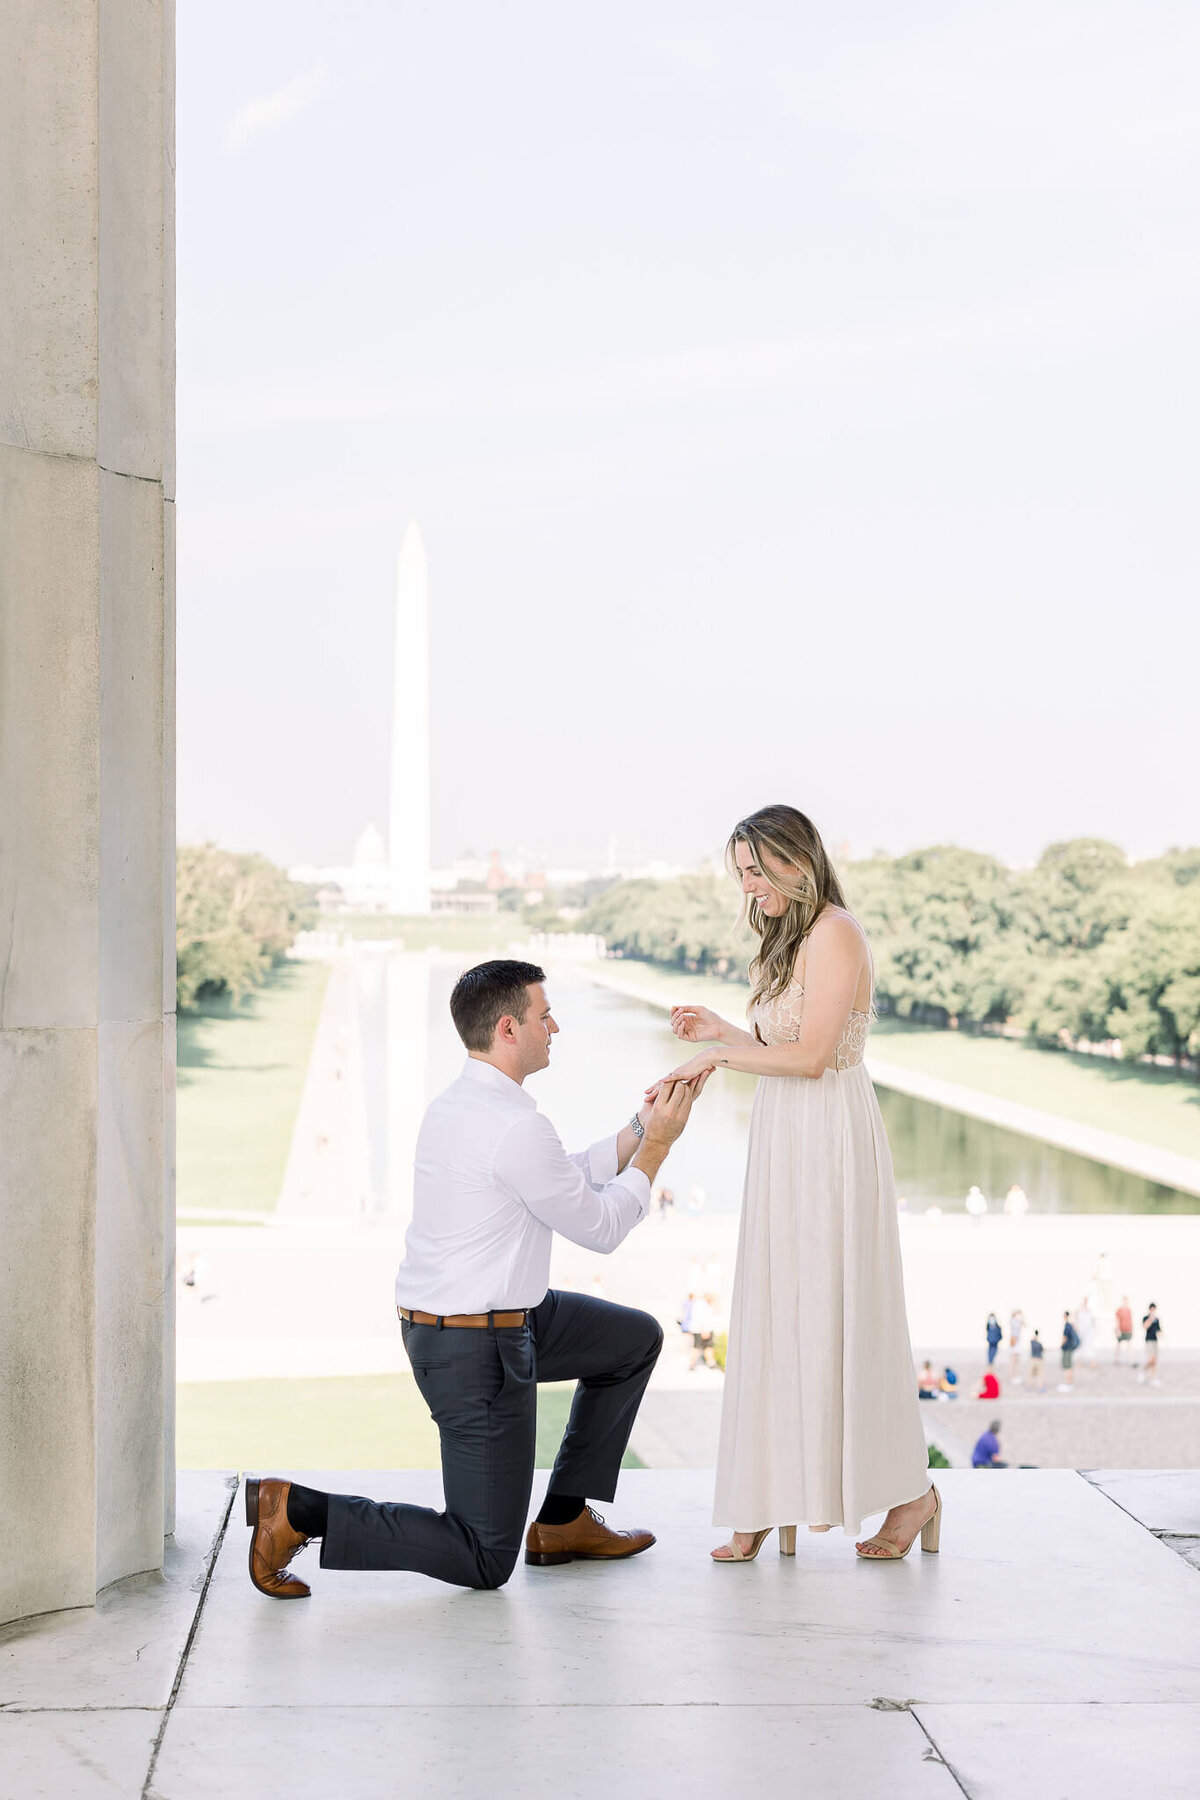 engagement-lincoln-memorial-proposal-photography-washington-DC-virginia-maryland-modern-light-and-airy-classic-timeless-romantic-10